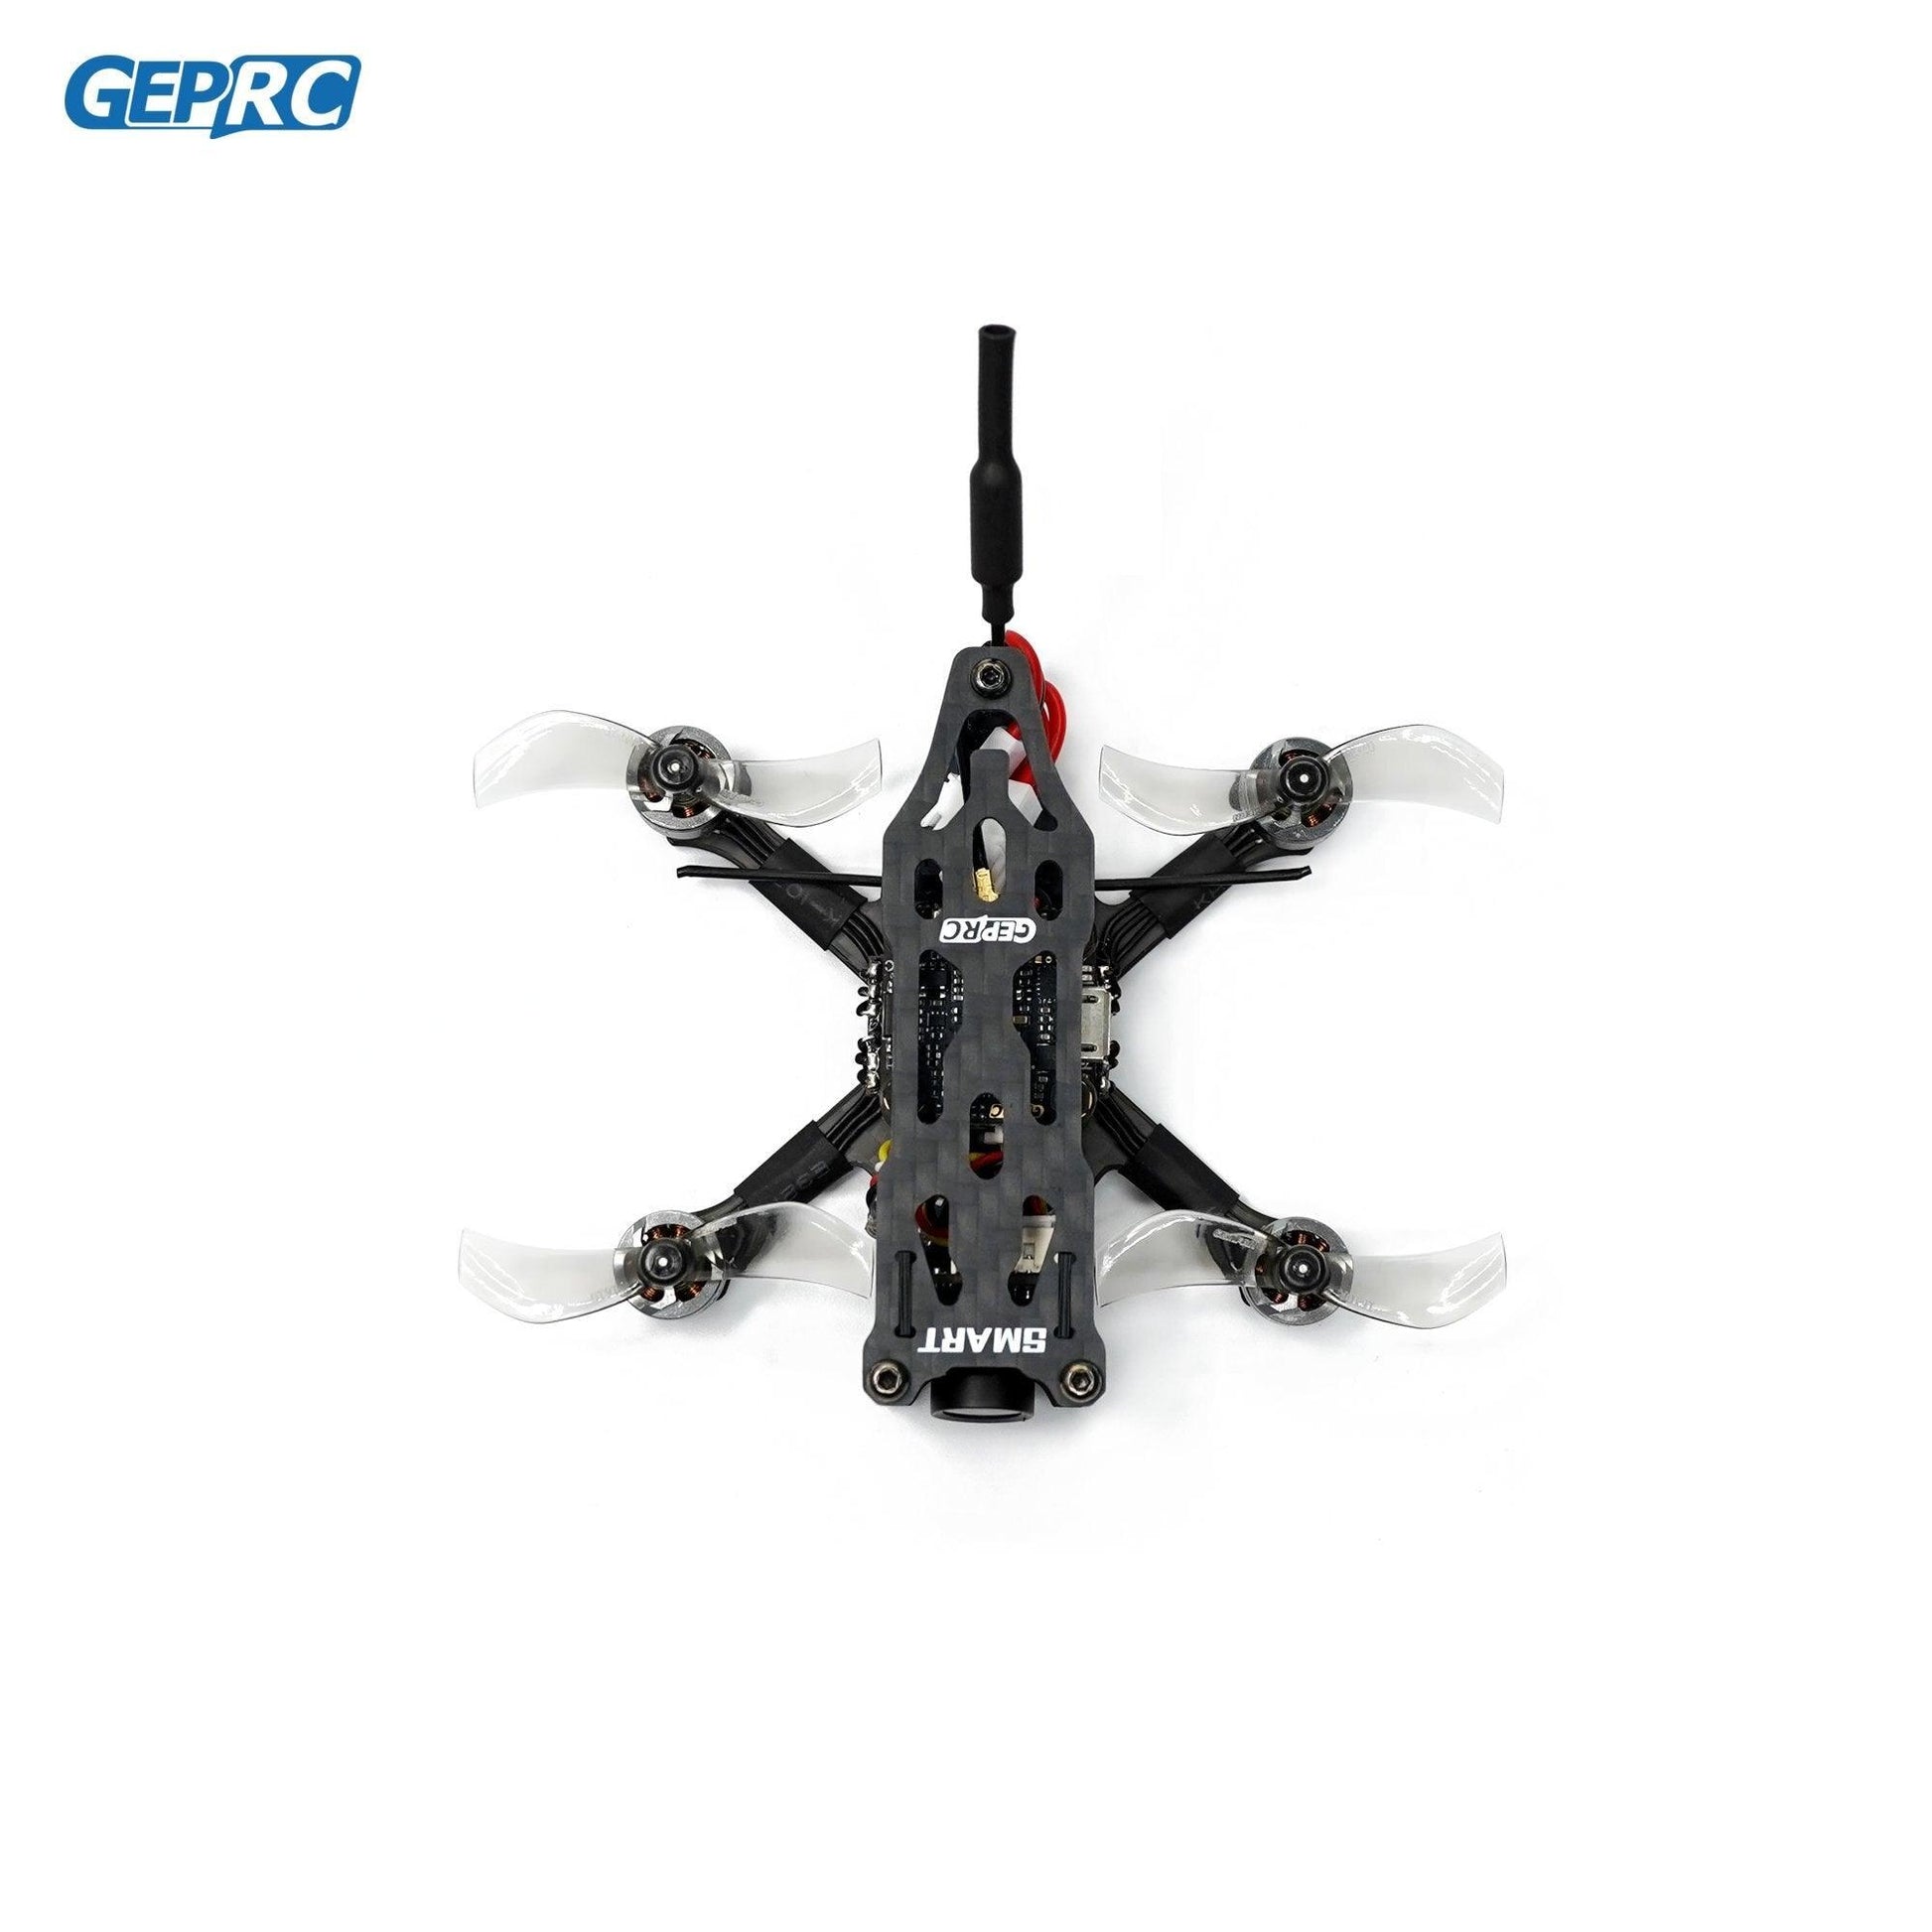 GEPRC SMART16 Freestyle FPV Drone - Caddx Ant Camera GR0803-11000KV Motor STABLE F411 FC For RC FPV Lightweight Quadcopter Drone - RCDrone